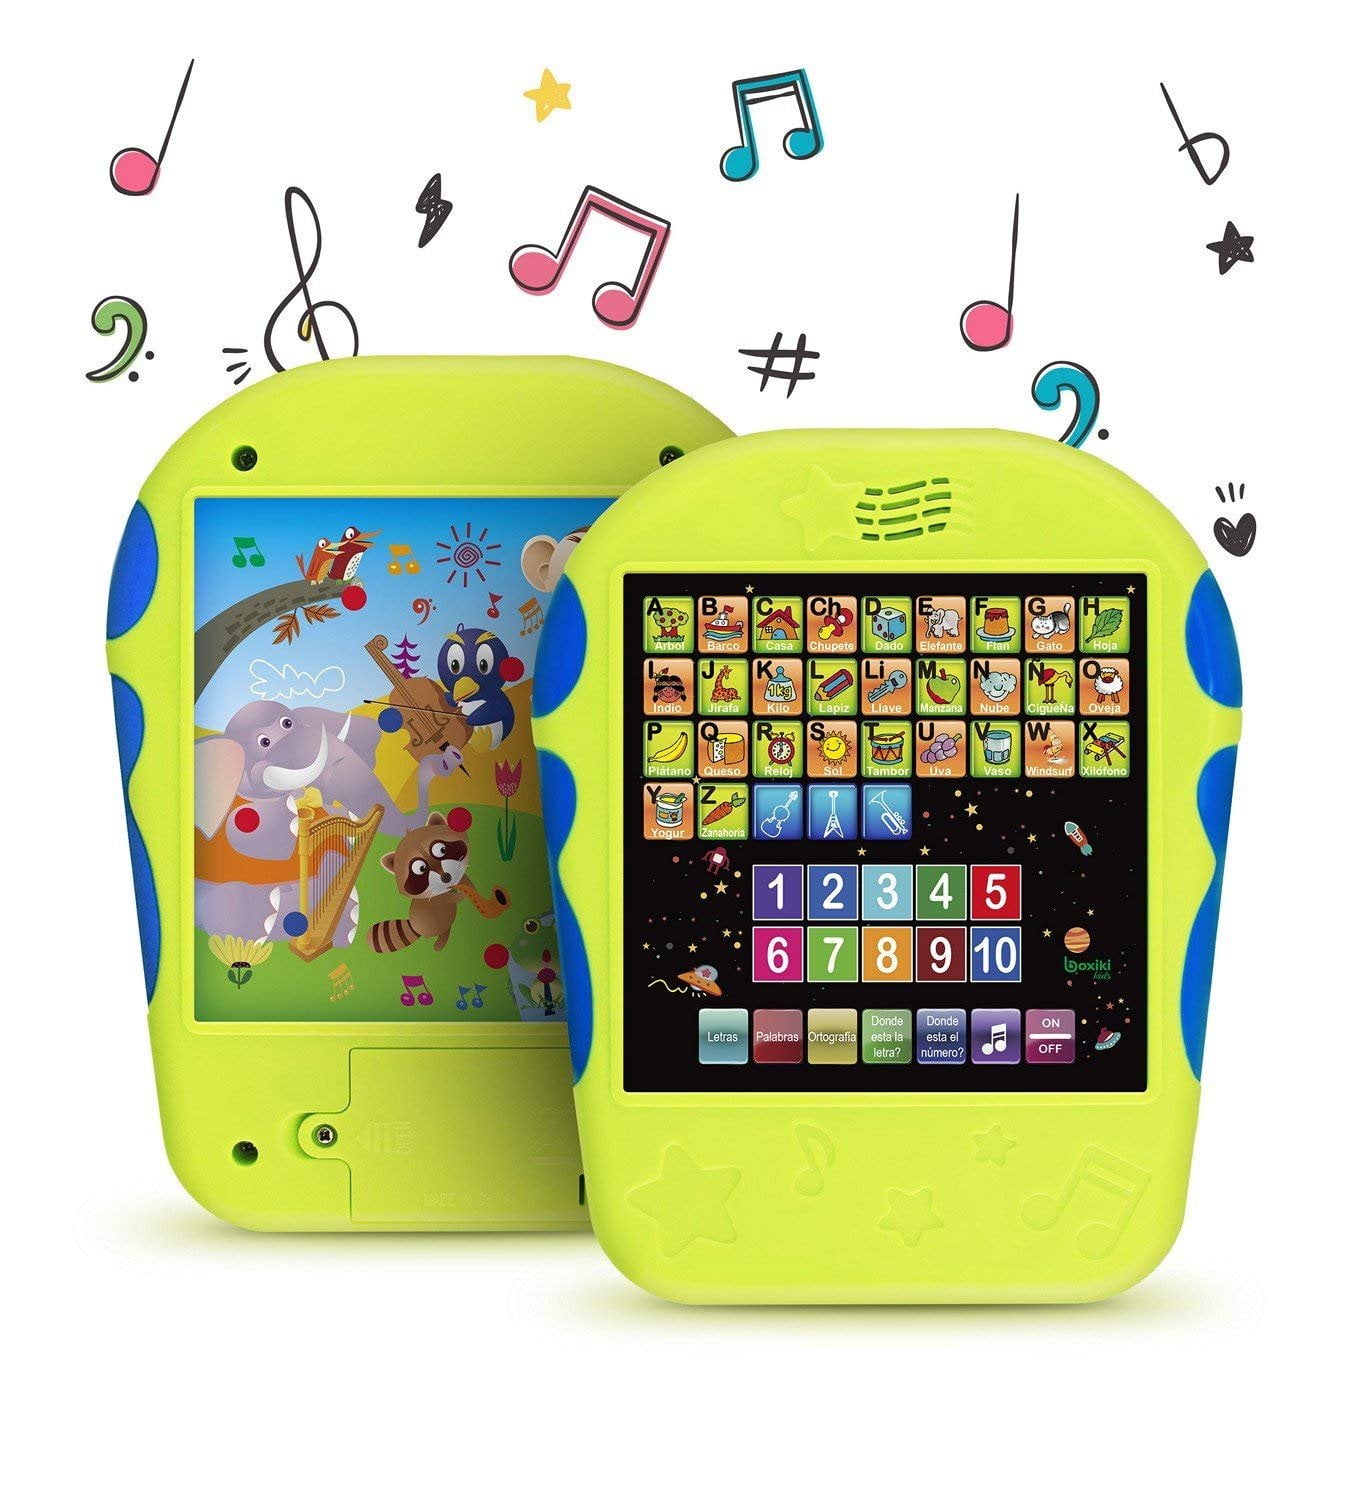 Boxiki kids Spanish Learning Tablet Educational Toy by Touch-and-Learn Spanish Alphabet Toy with Spanish Number Learning, Spanish ABCs, Spelling, Where Is? Games, Melodies, Animals and Sounds